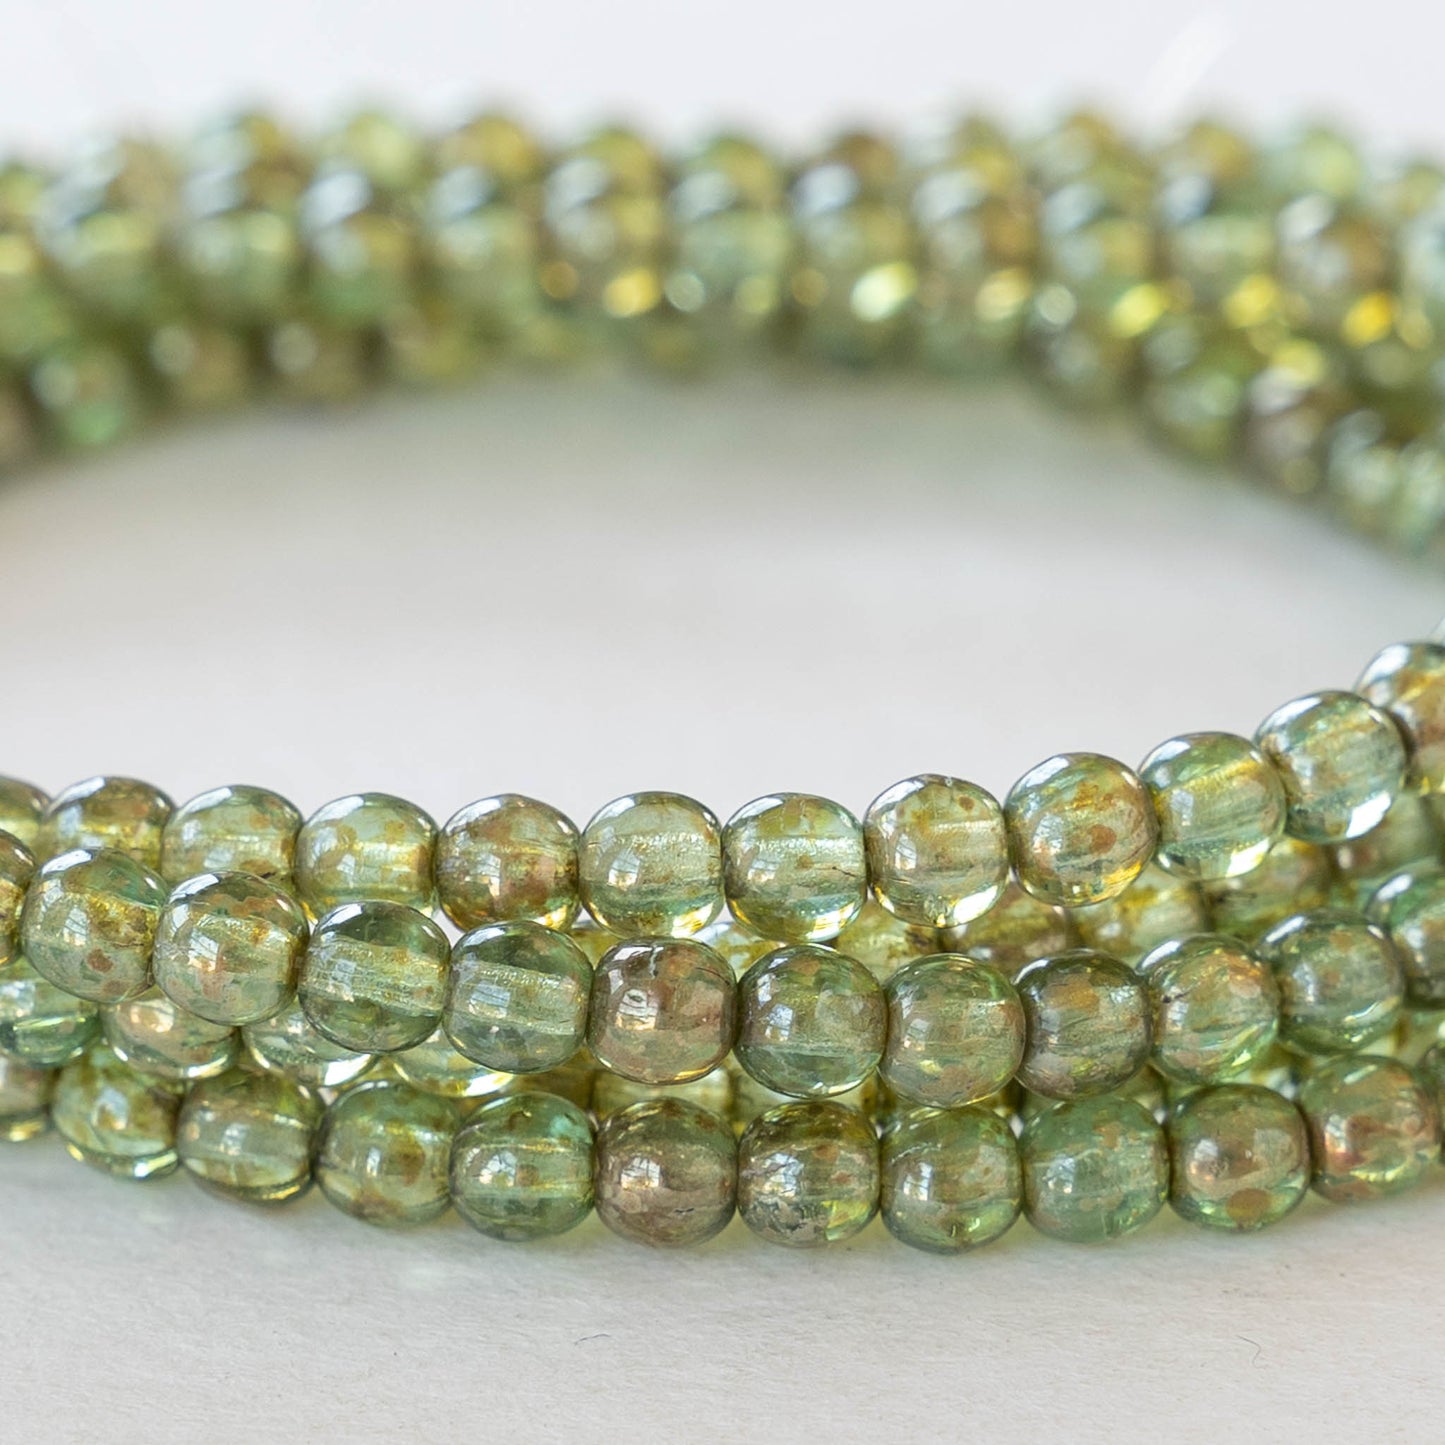 Load image into Gallery viewer, 4mm Round Glass Beads - Sage with Picasso Finish - 50 Beads
